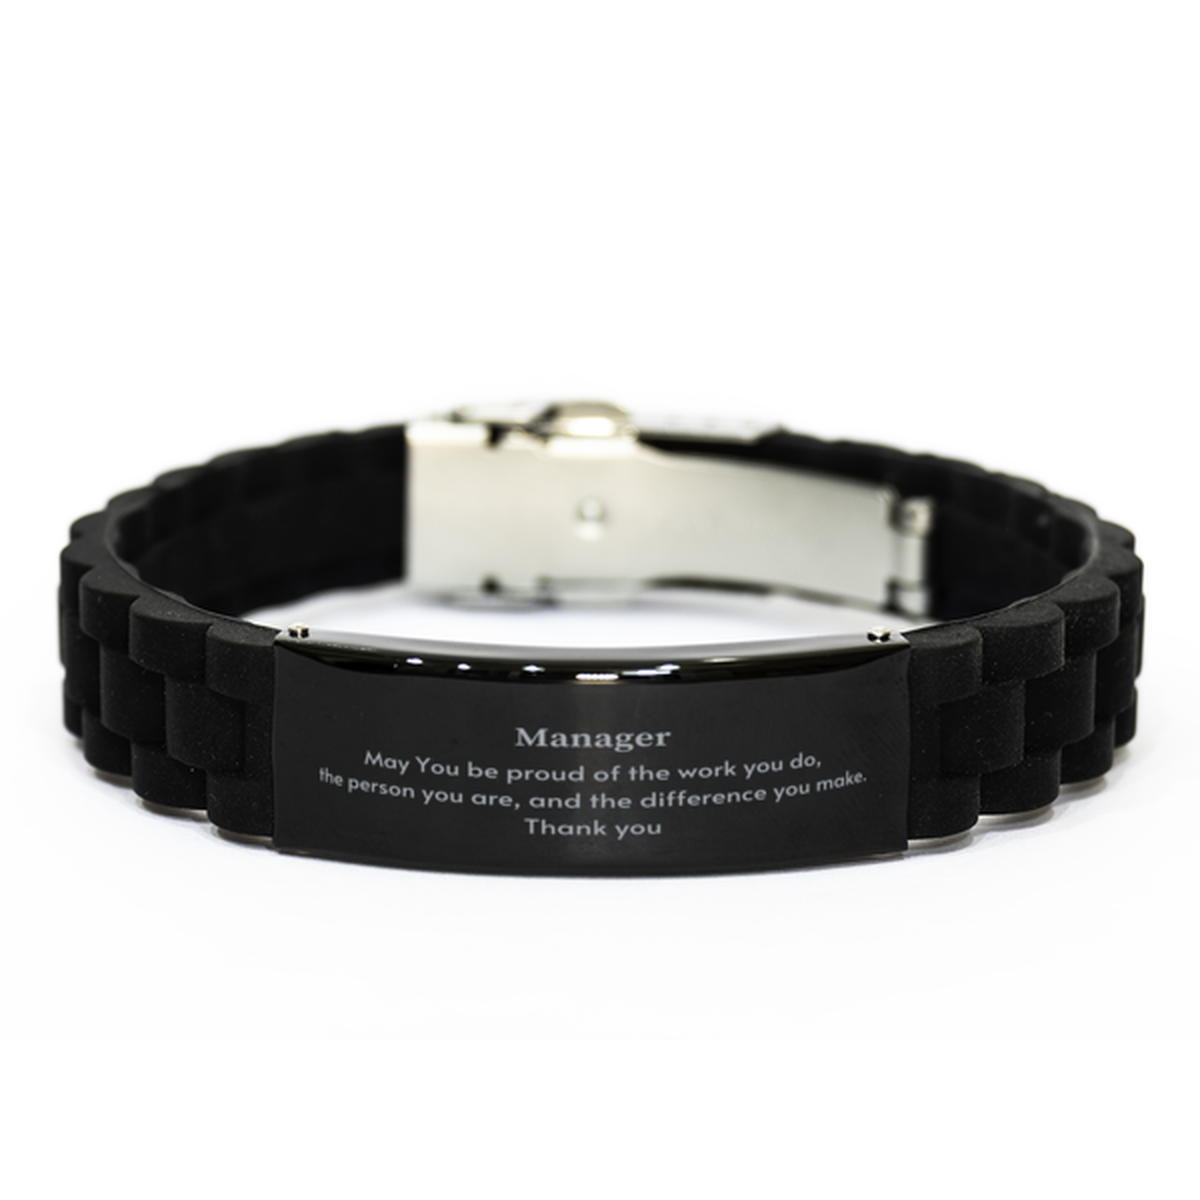 Heartwarming Black Glidelock Clasp Bracelet Retirement Coworkers Gifts for Manager, Manager May You be proud of the work you do, the person you are Gifts for Boss Men Women Friends